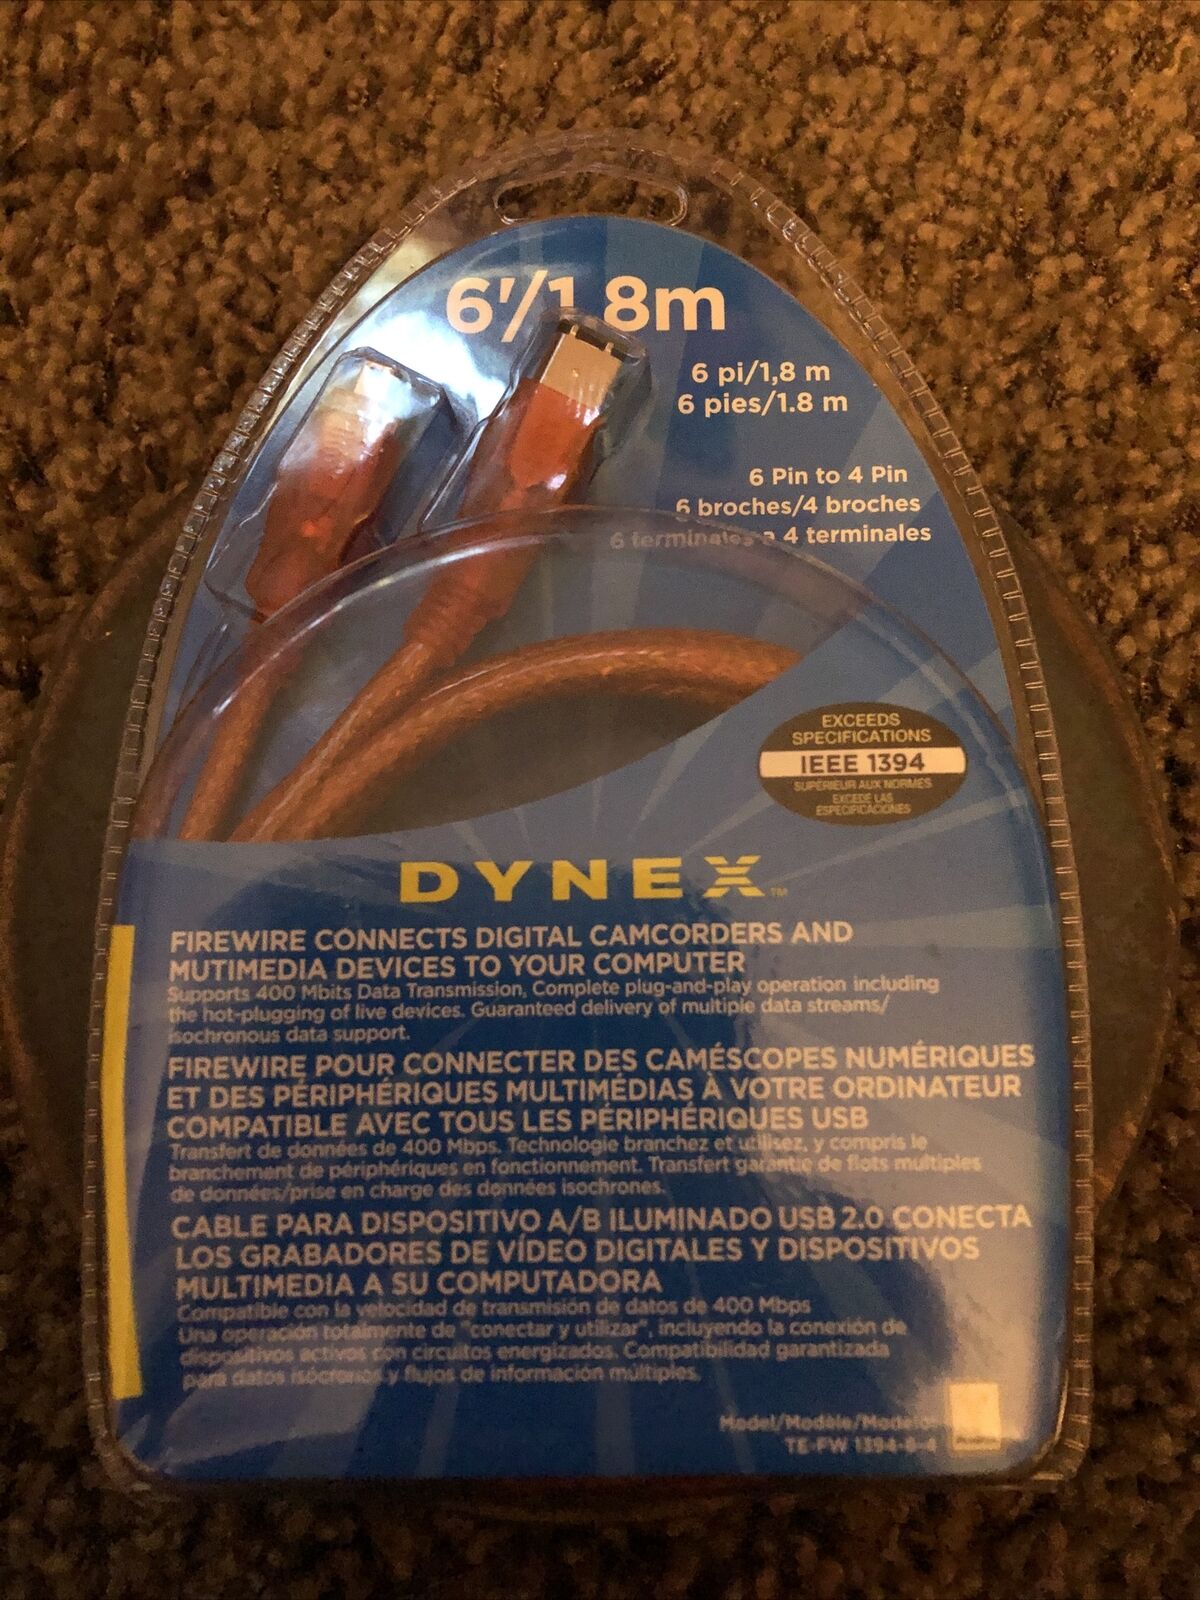 Dynex Firewire 6'/1.8m Digital Media Cable 6 PIN to 4 Pin New Unopened